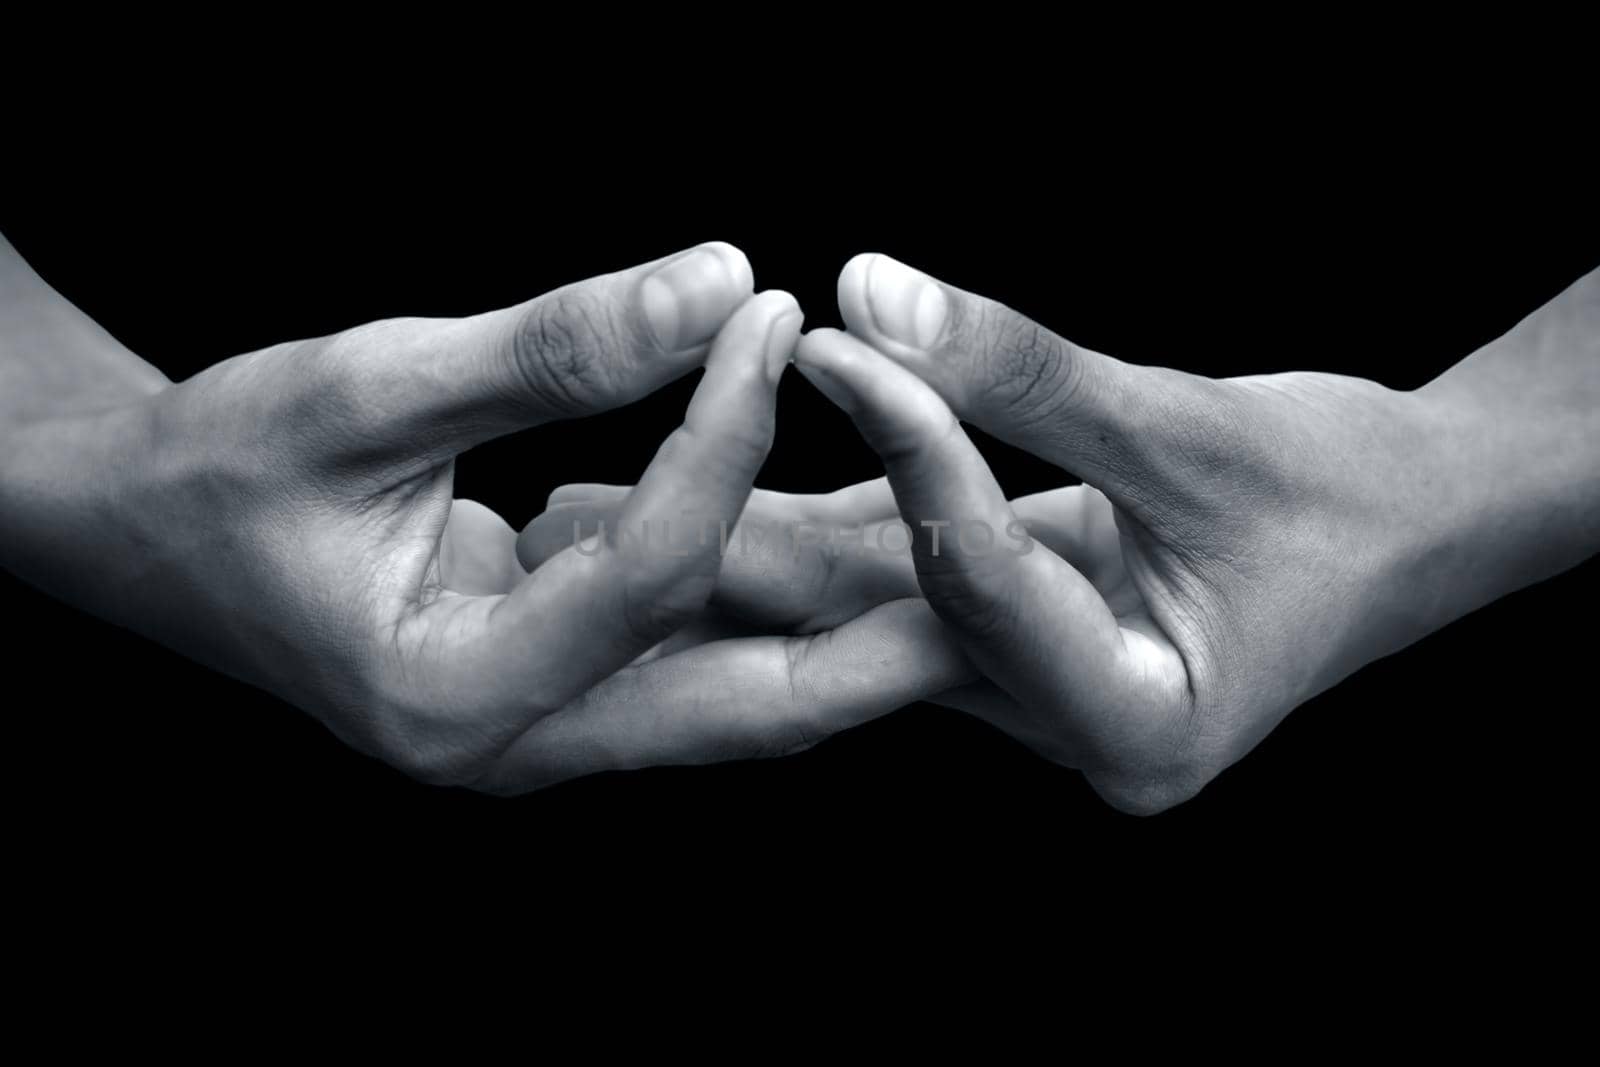 Mida-no Jouin Mudra demonstrated by male hands isolated on black background.